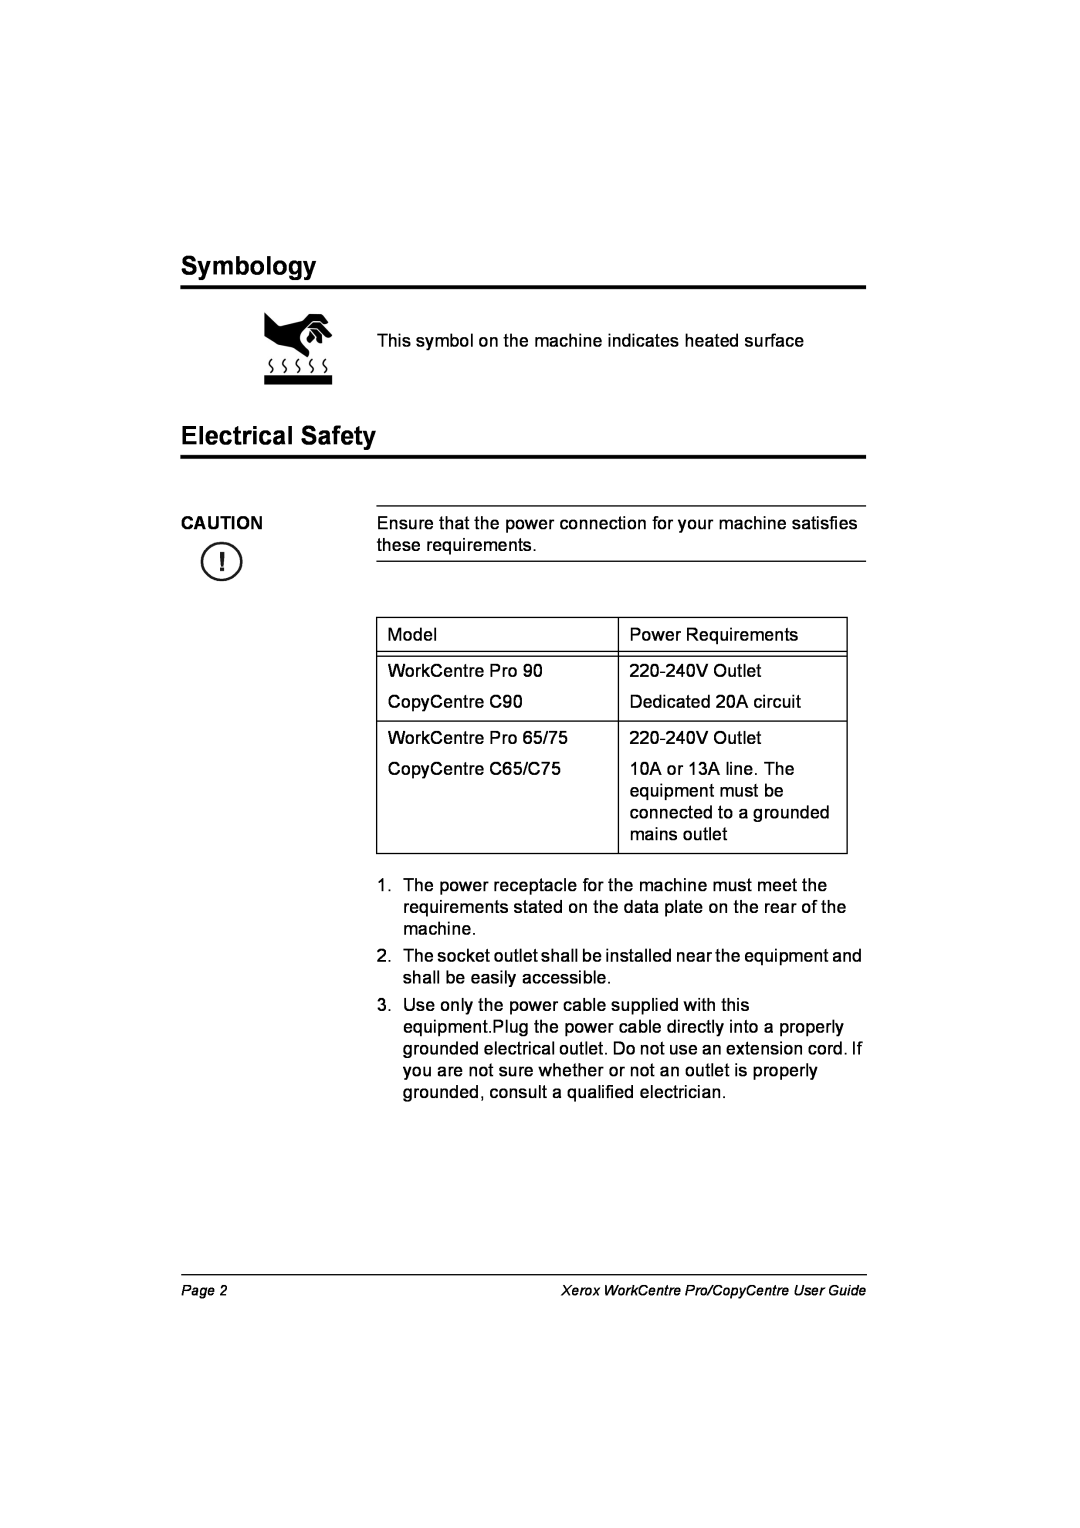 Xerox C65, C90, C75, WorkCentre Pro 75 manual Symbology, Electrical Safety 